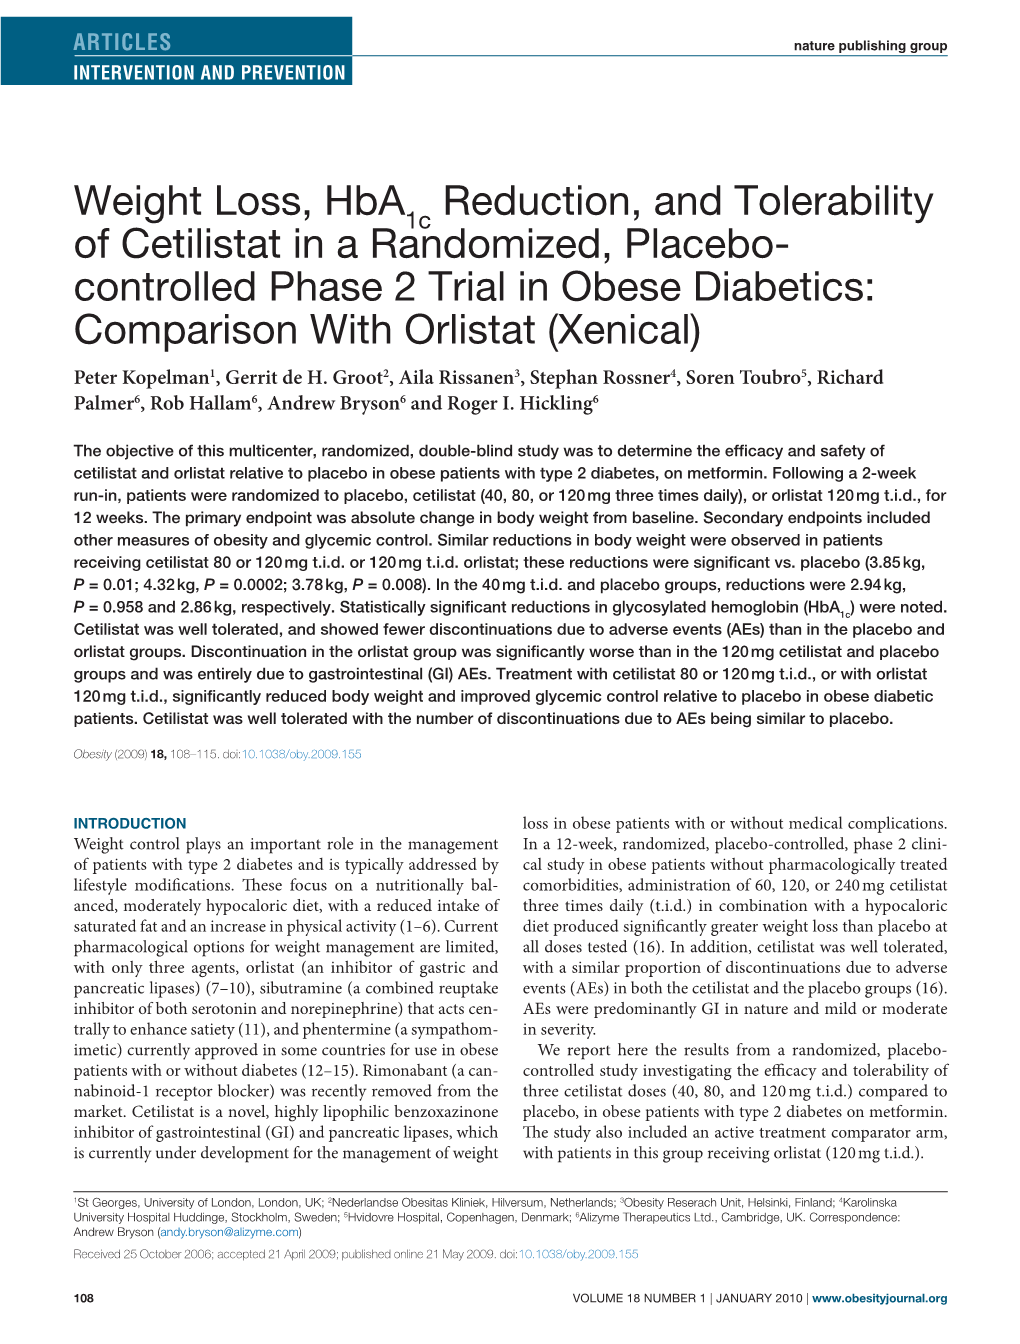 Weight Loss, Hba1c Reduction, and Tolerability of Cetilistat in A